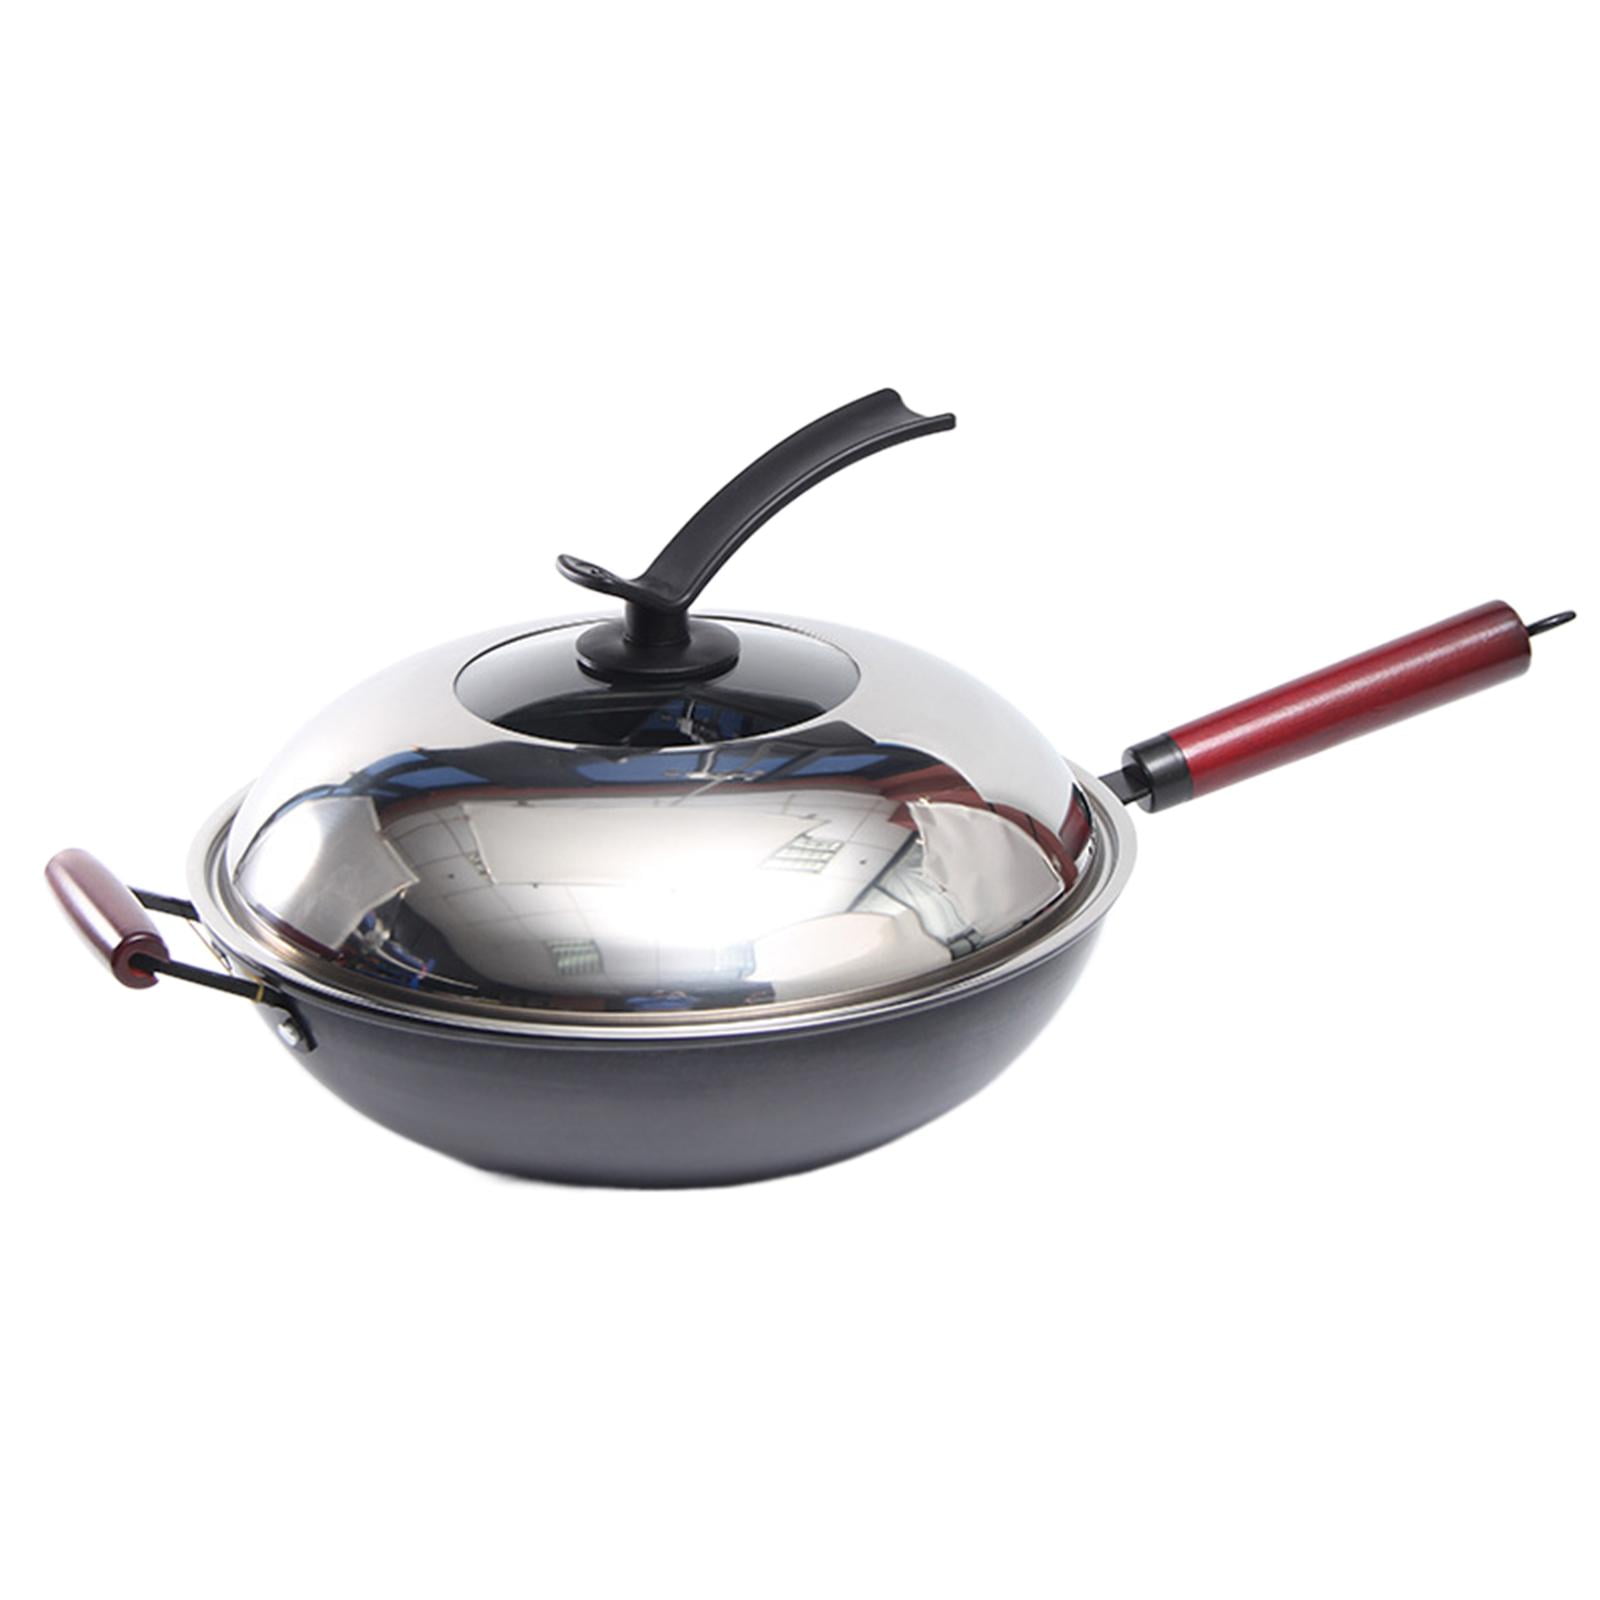 Kitchen Stir Fry Pans with Lid Cookware Pots and Pans Skillet for All Stoves 36cm, Size: 36 cm, Other